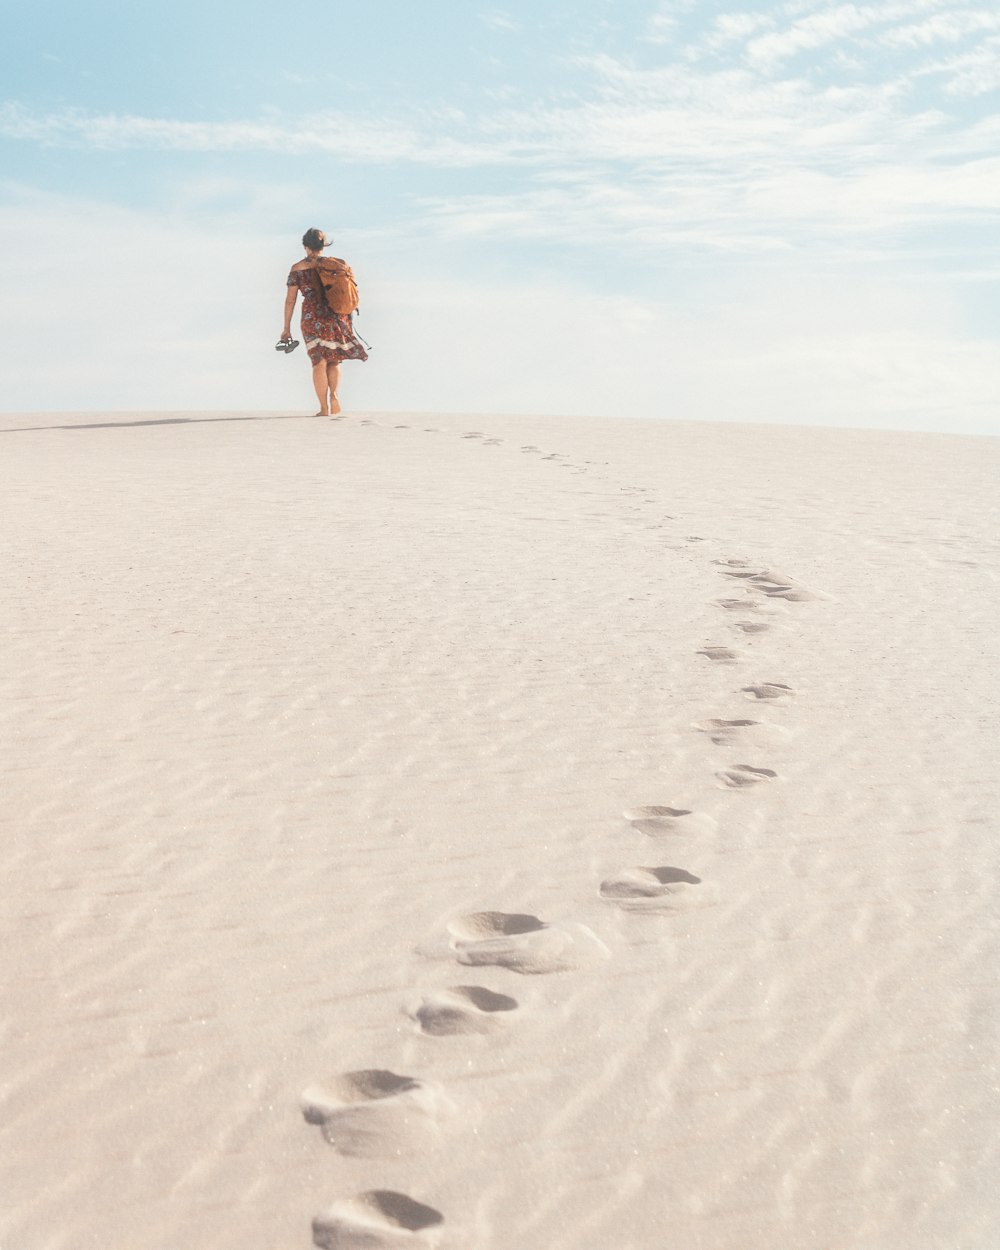 a man walking across a sandy beach with footprints in the sand